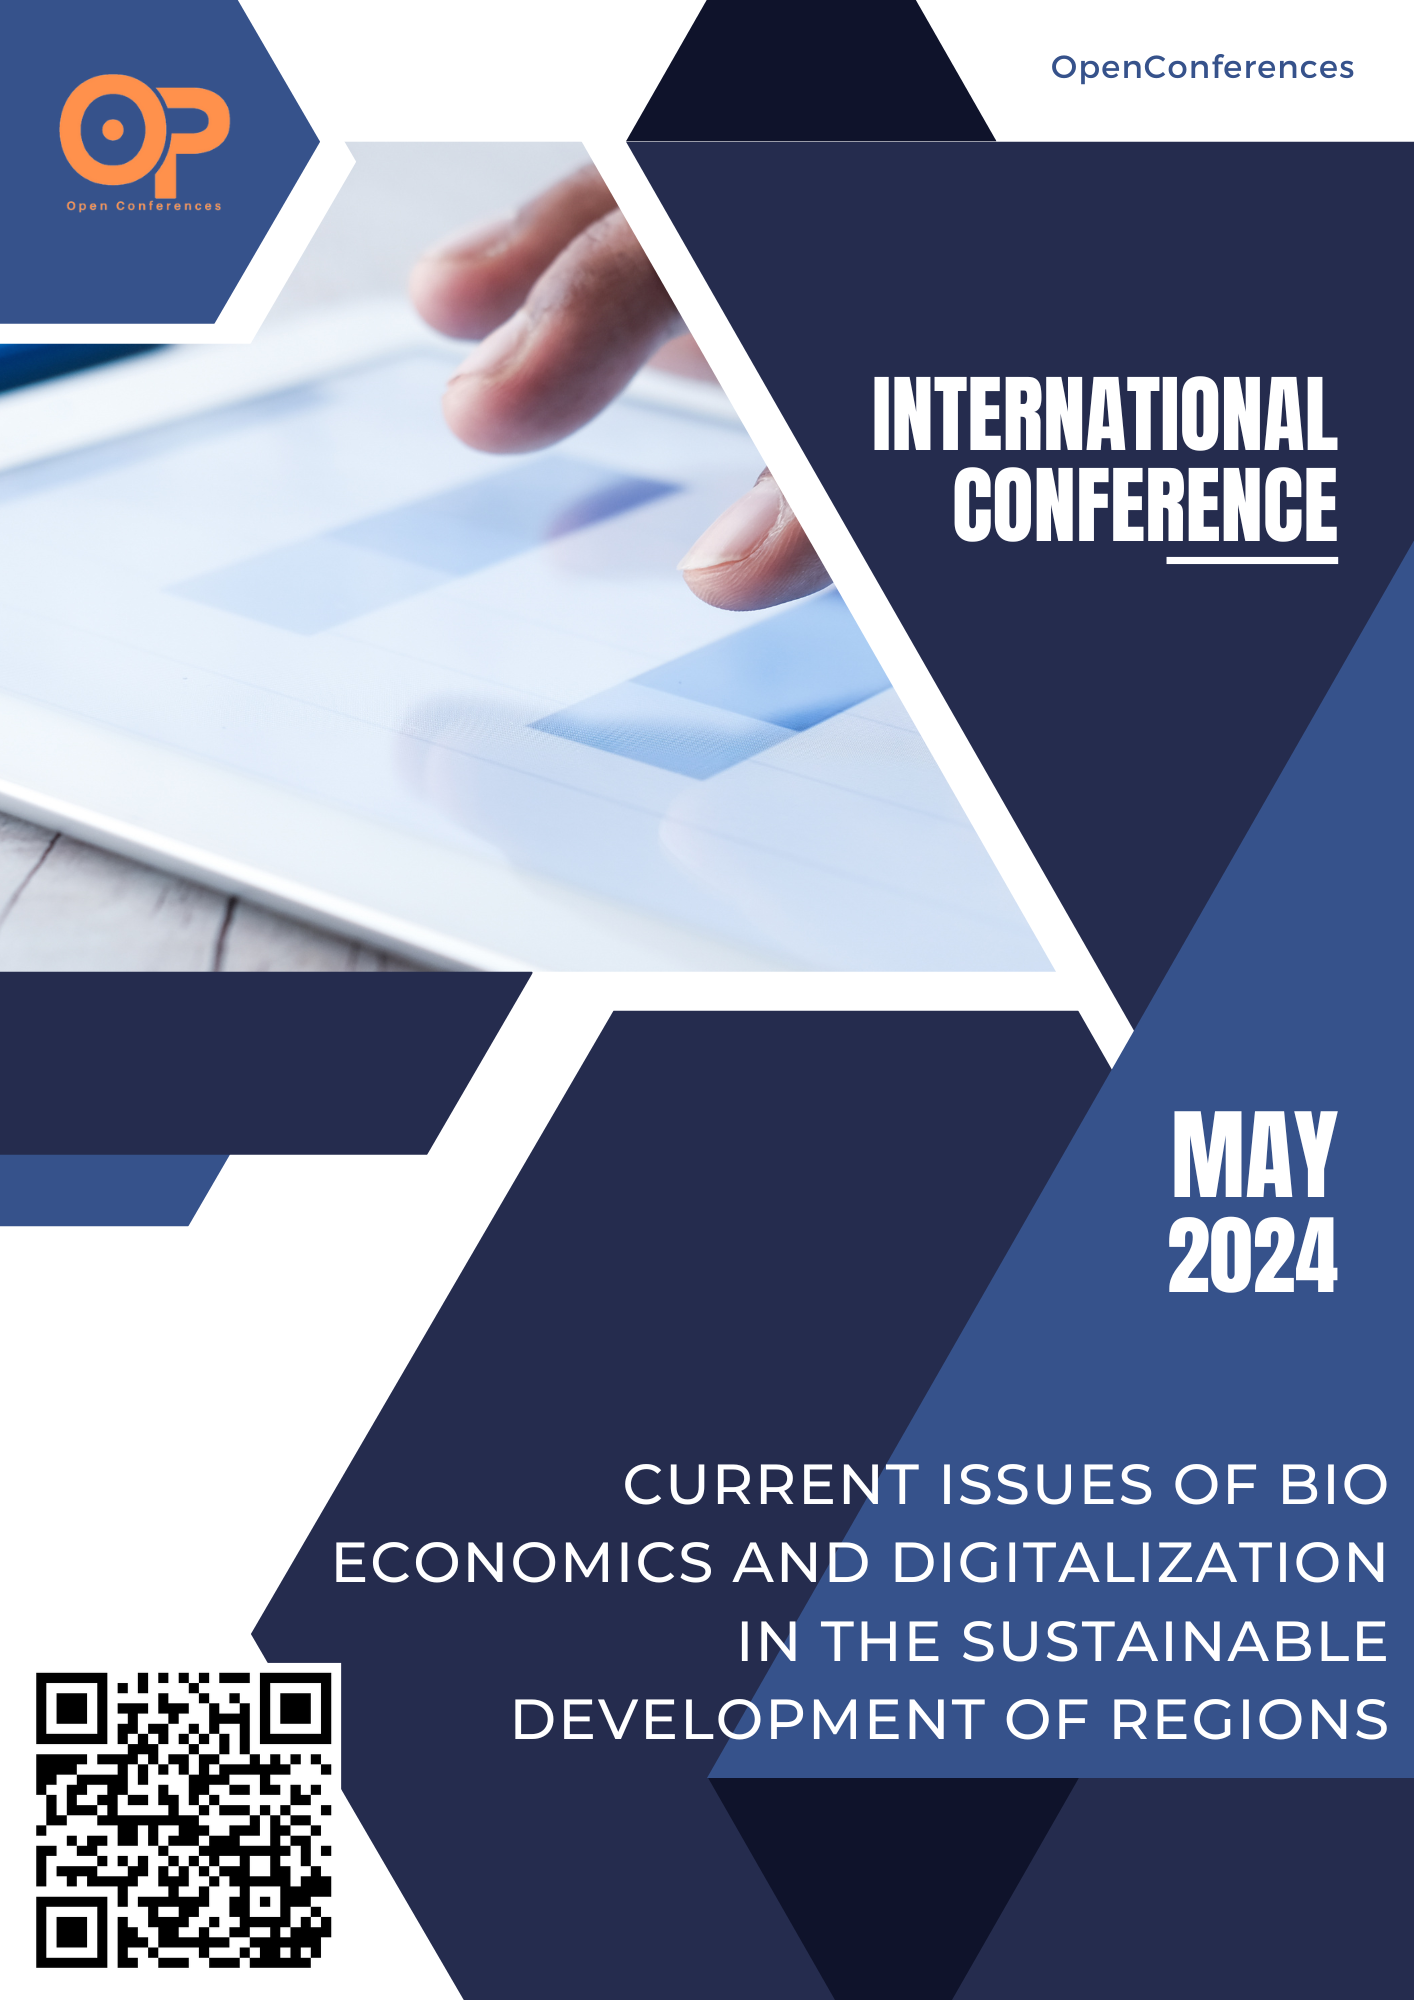 Current Issues of Bio Economics and Digitalization in the Sustainable Development of Regions